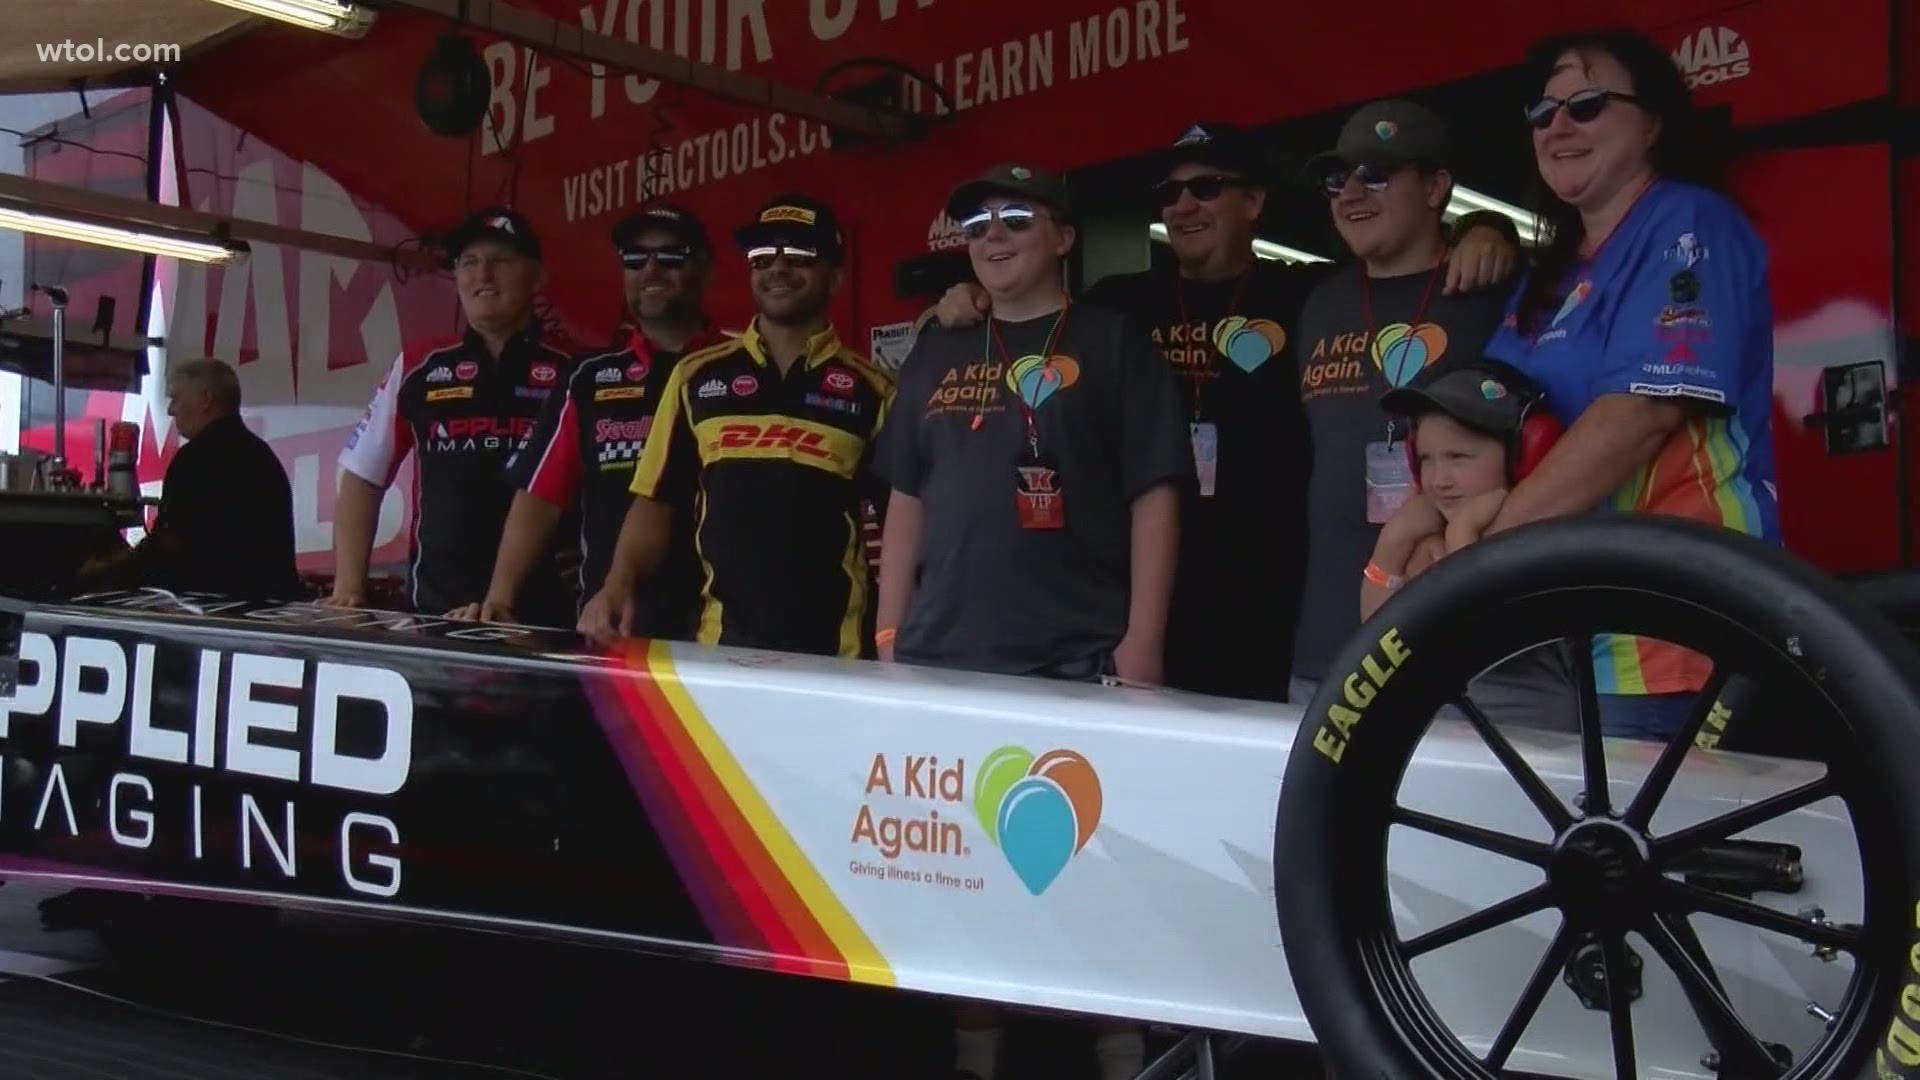 When the NHRA was in Norwalk, A Kid Again teamed up with Kalitta Motorsports to give kids battling life-threatening illnesses an experience of a lifetime.